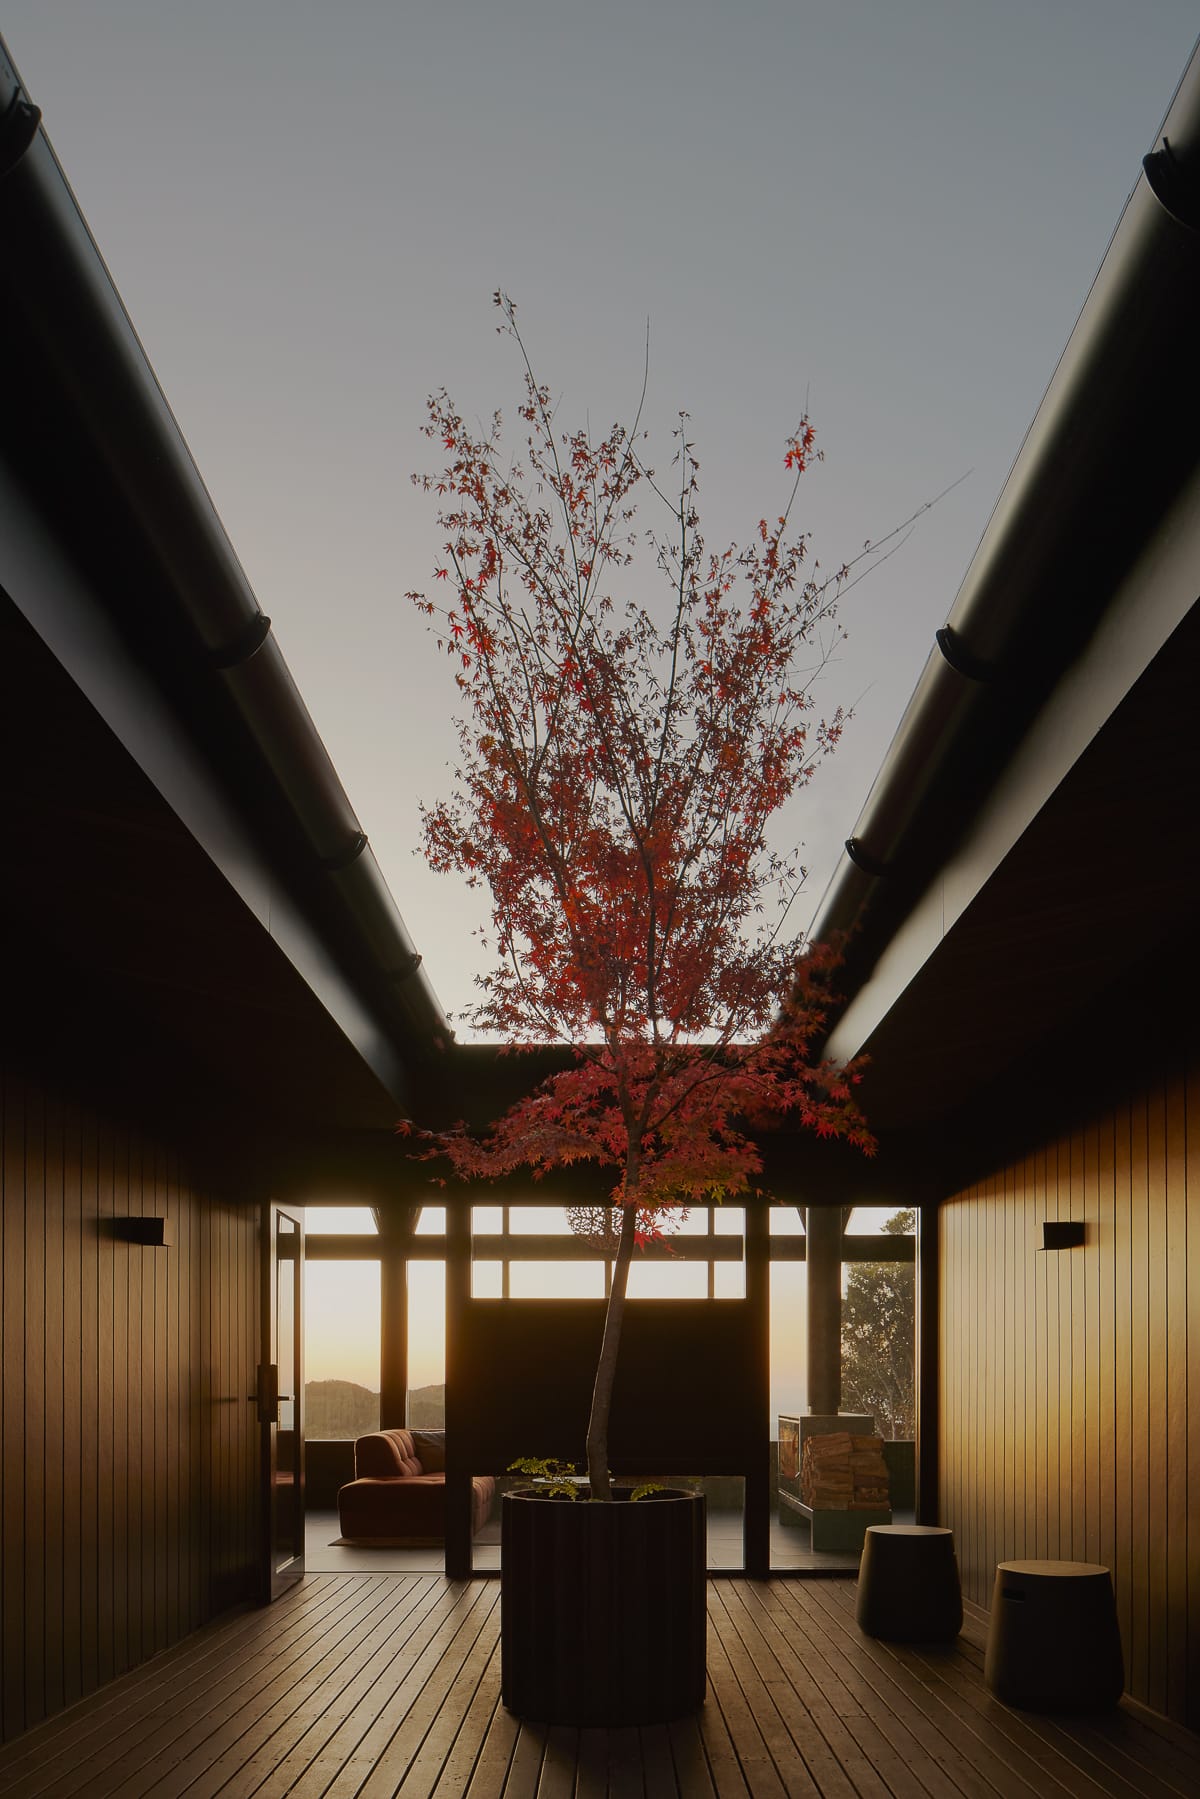 Cloudview Springbrook by Paul Uhlmann Architects. Photography by Brock Beazley. Enclosed, external deck at sunset. Large potted tree in centre of decking. Timber paneled walls. Windows in background look into interior living space.